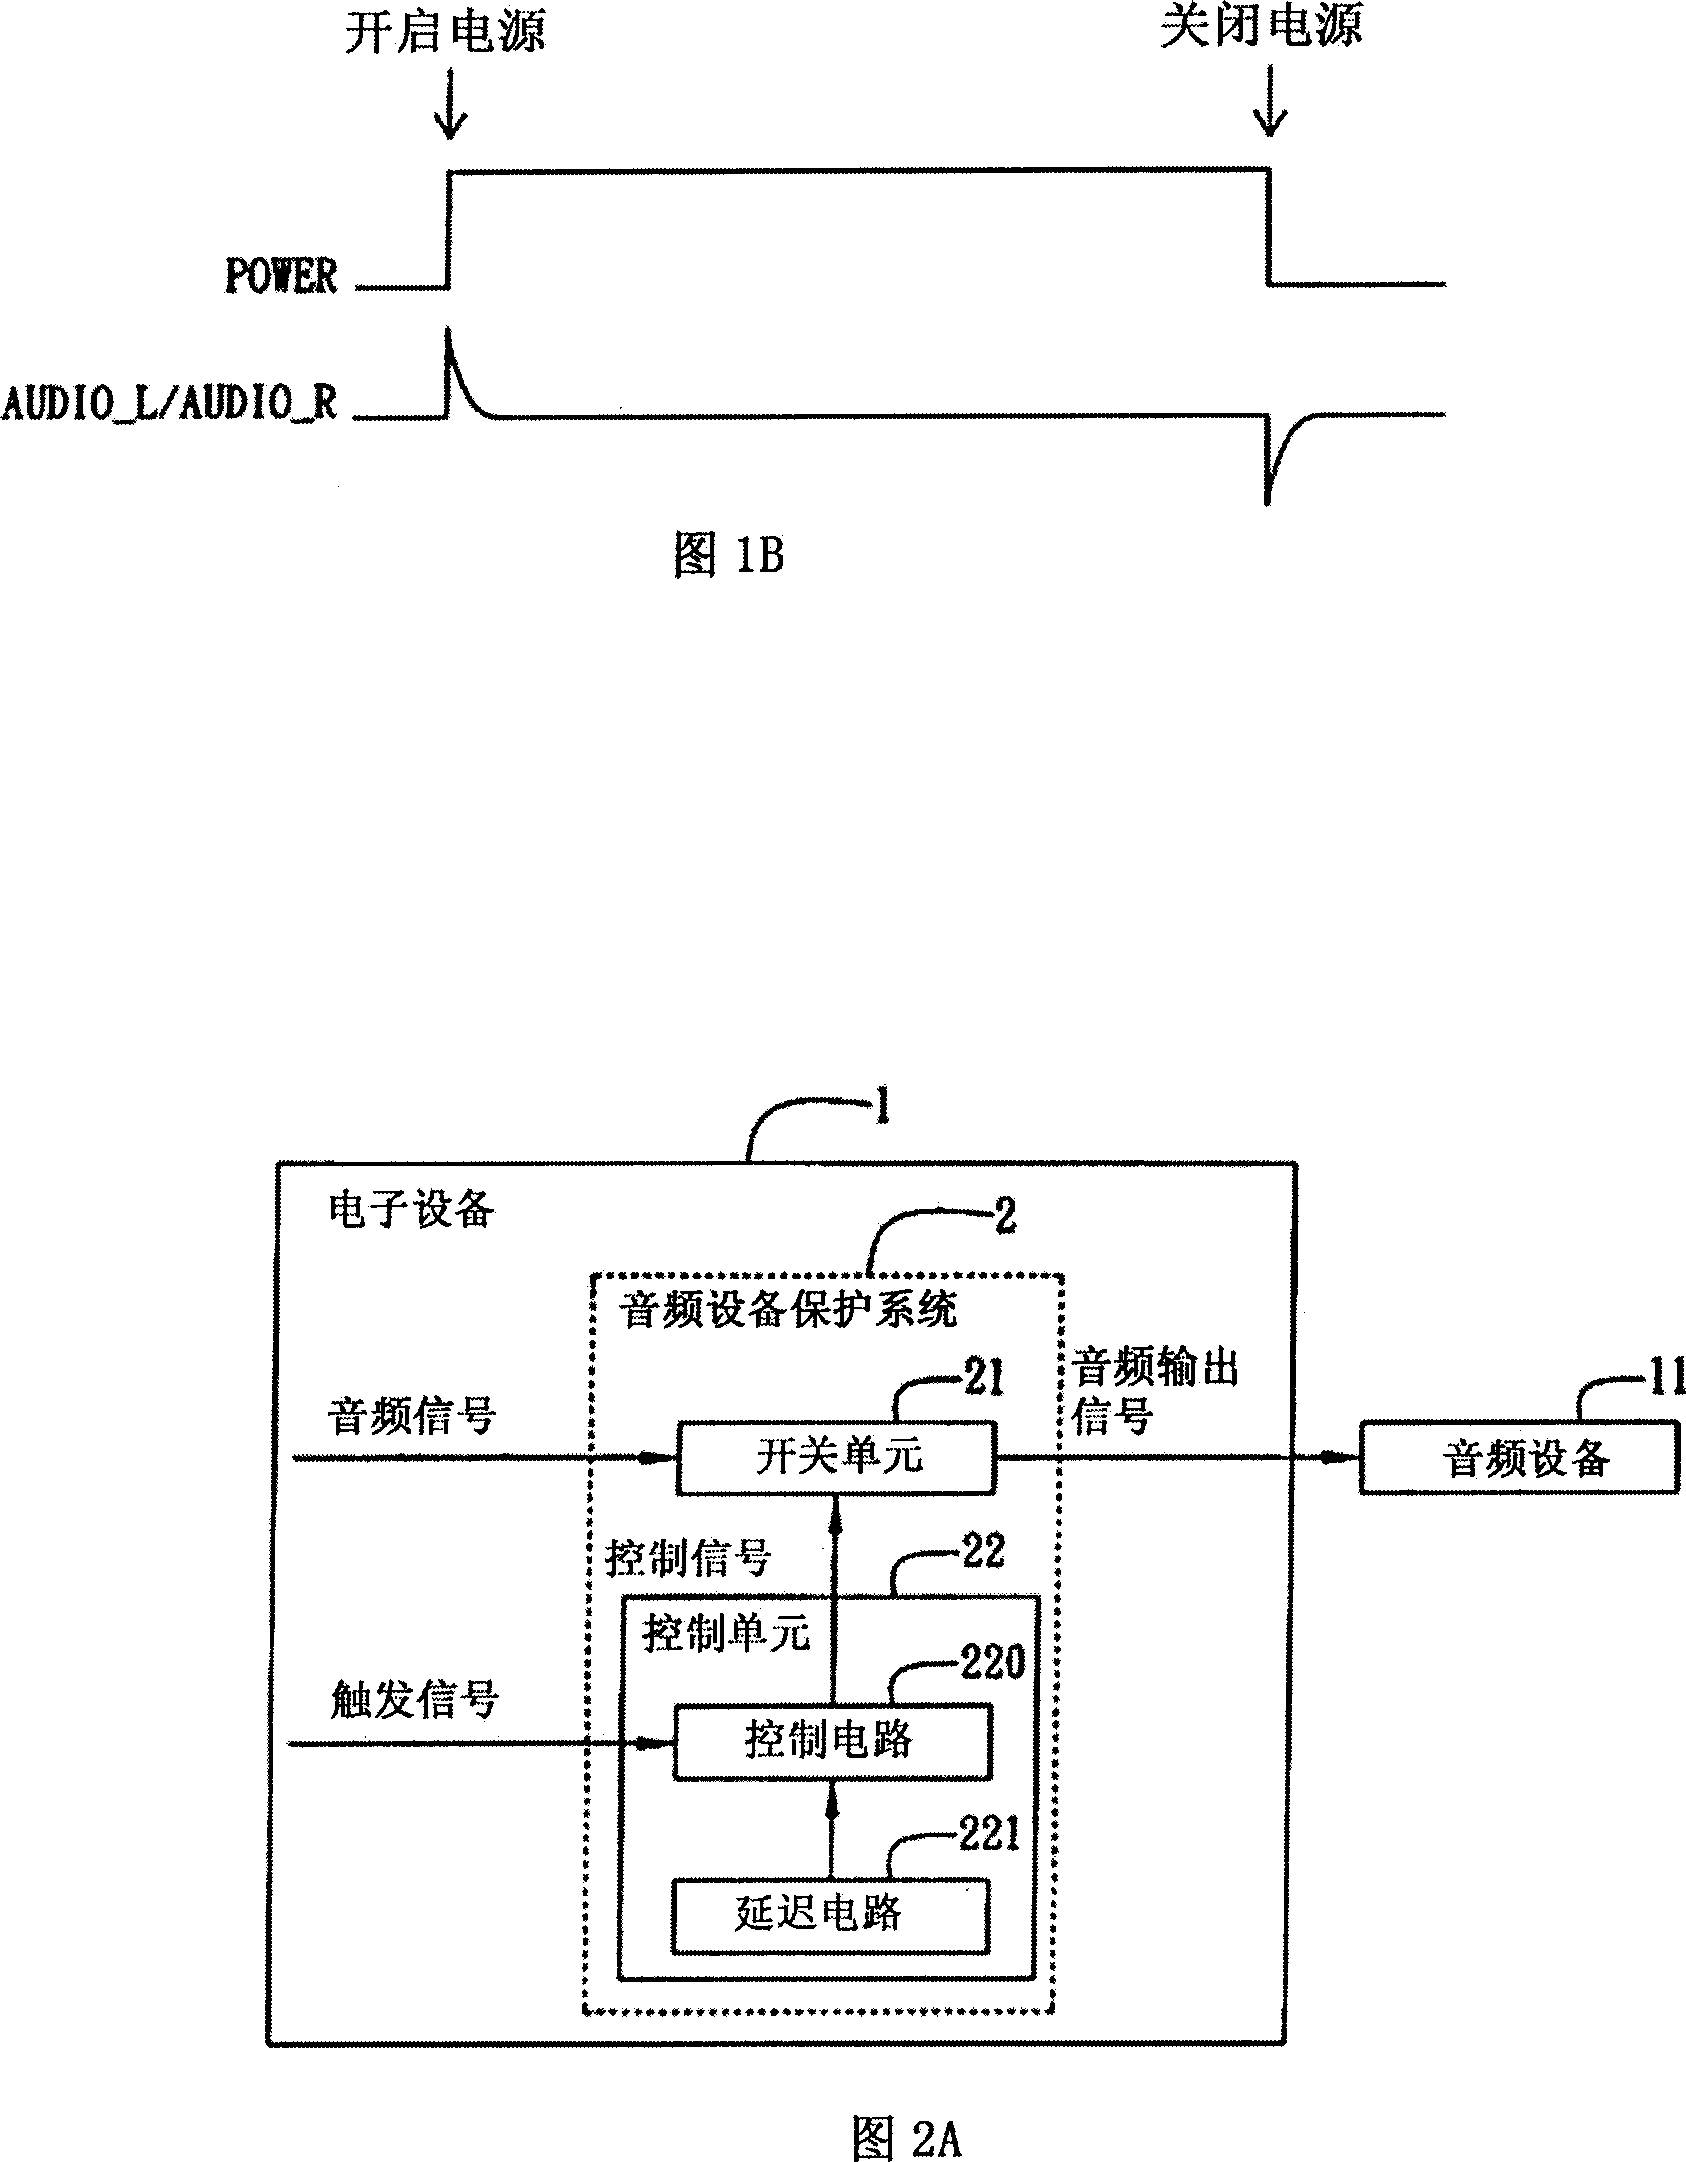 Audio device protection system